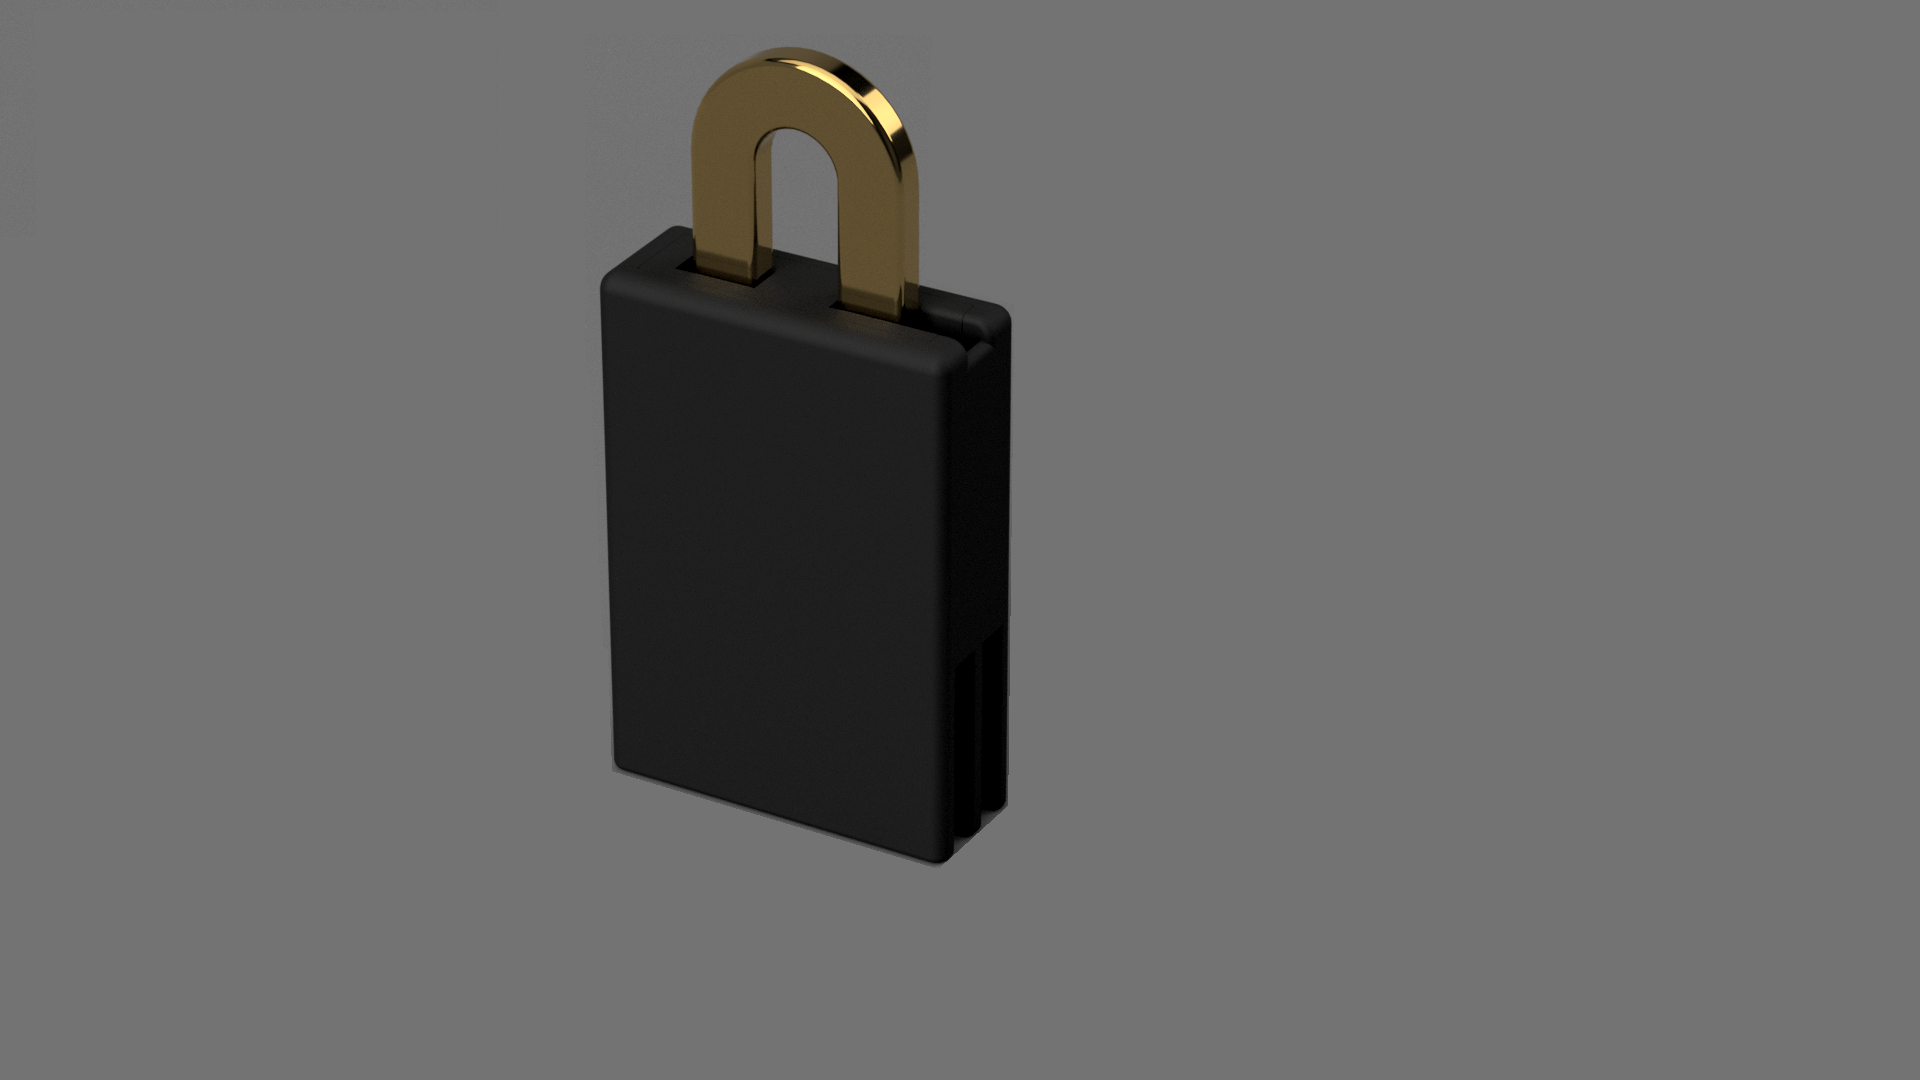 3D Printed The Puzzle Lockevolvingextrusions | Pinshape - 3D Print Puzzle Lock